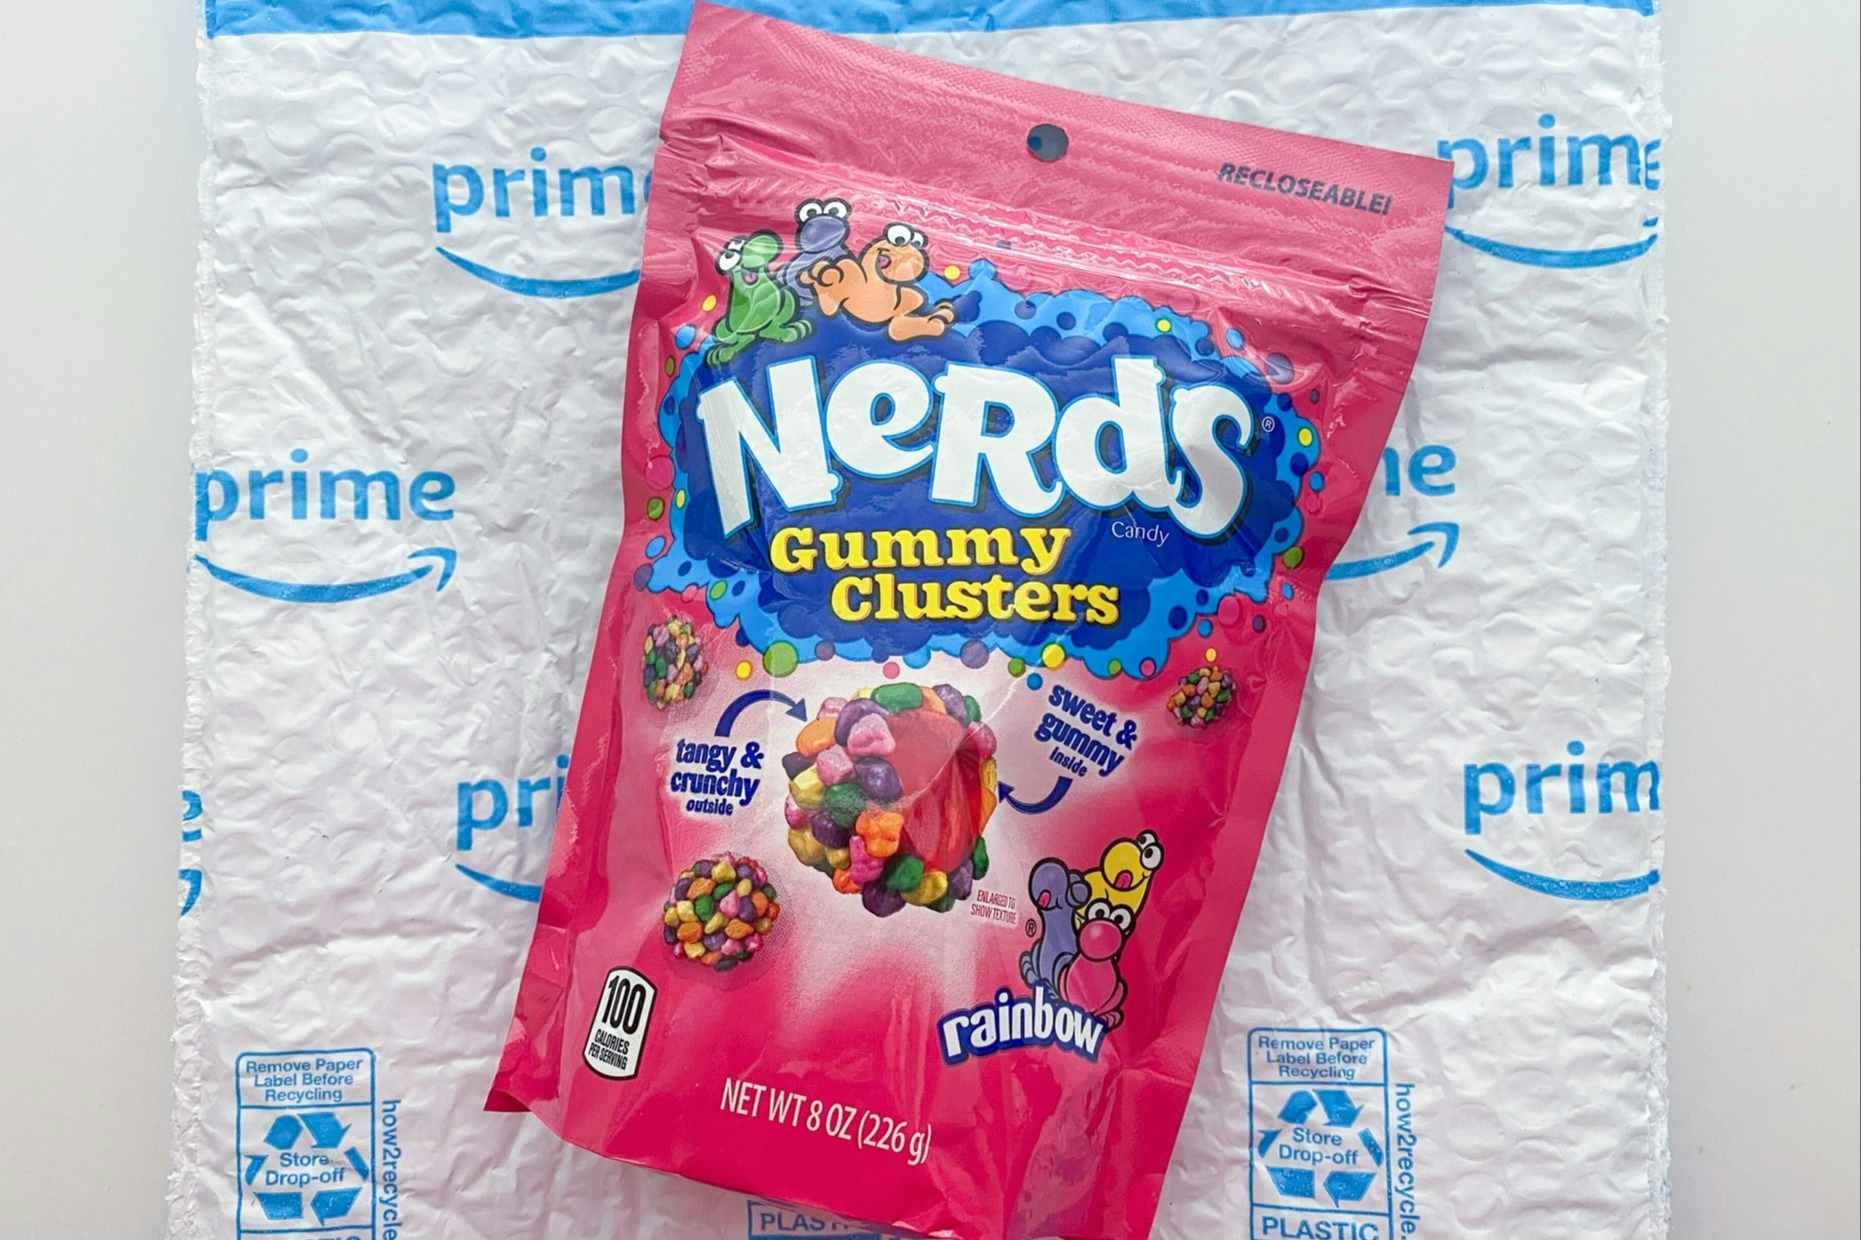 Nerds Gummy Clusters Candy, as Low as $1.70 on Amazon